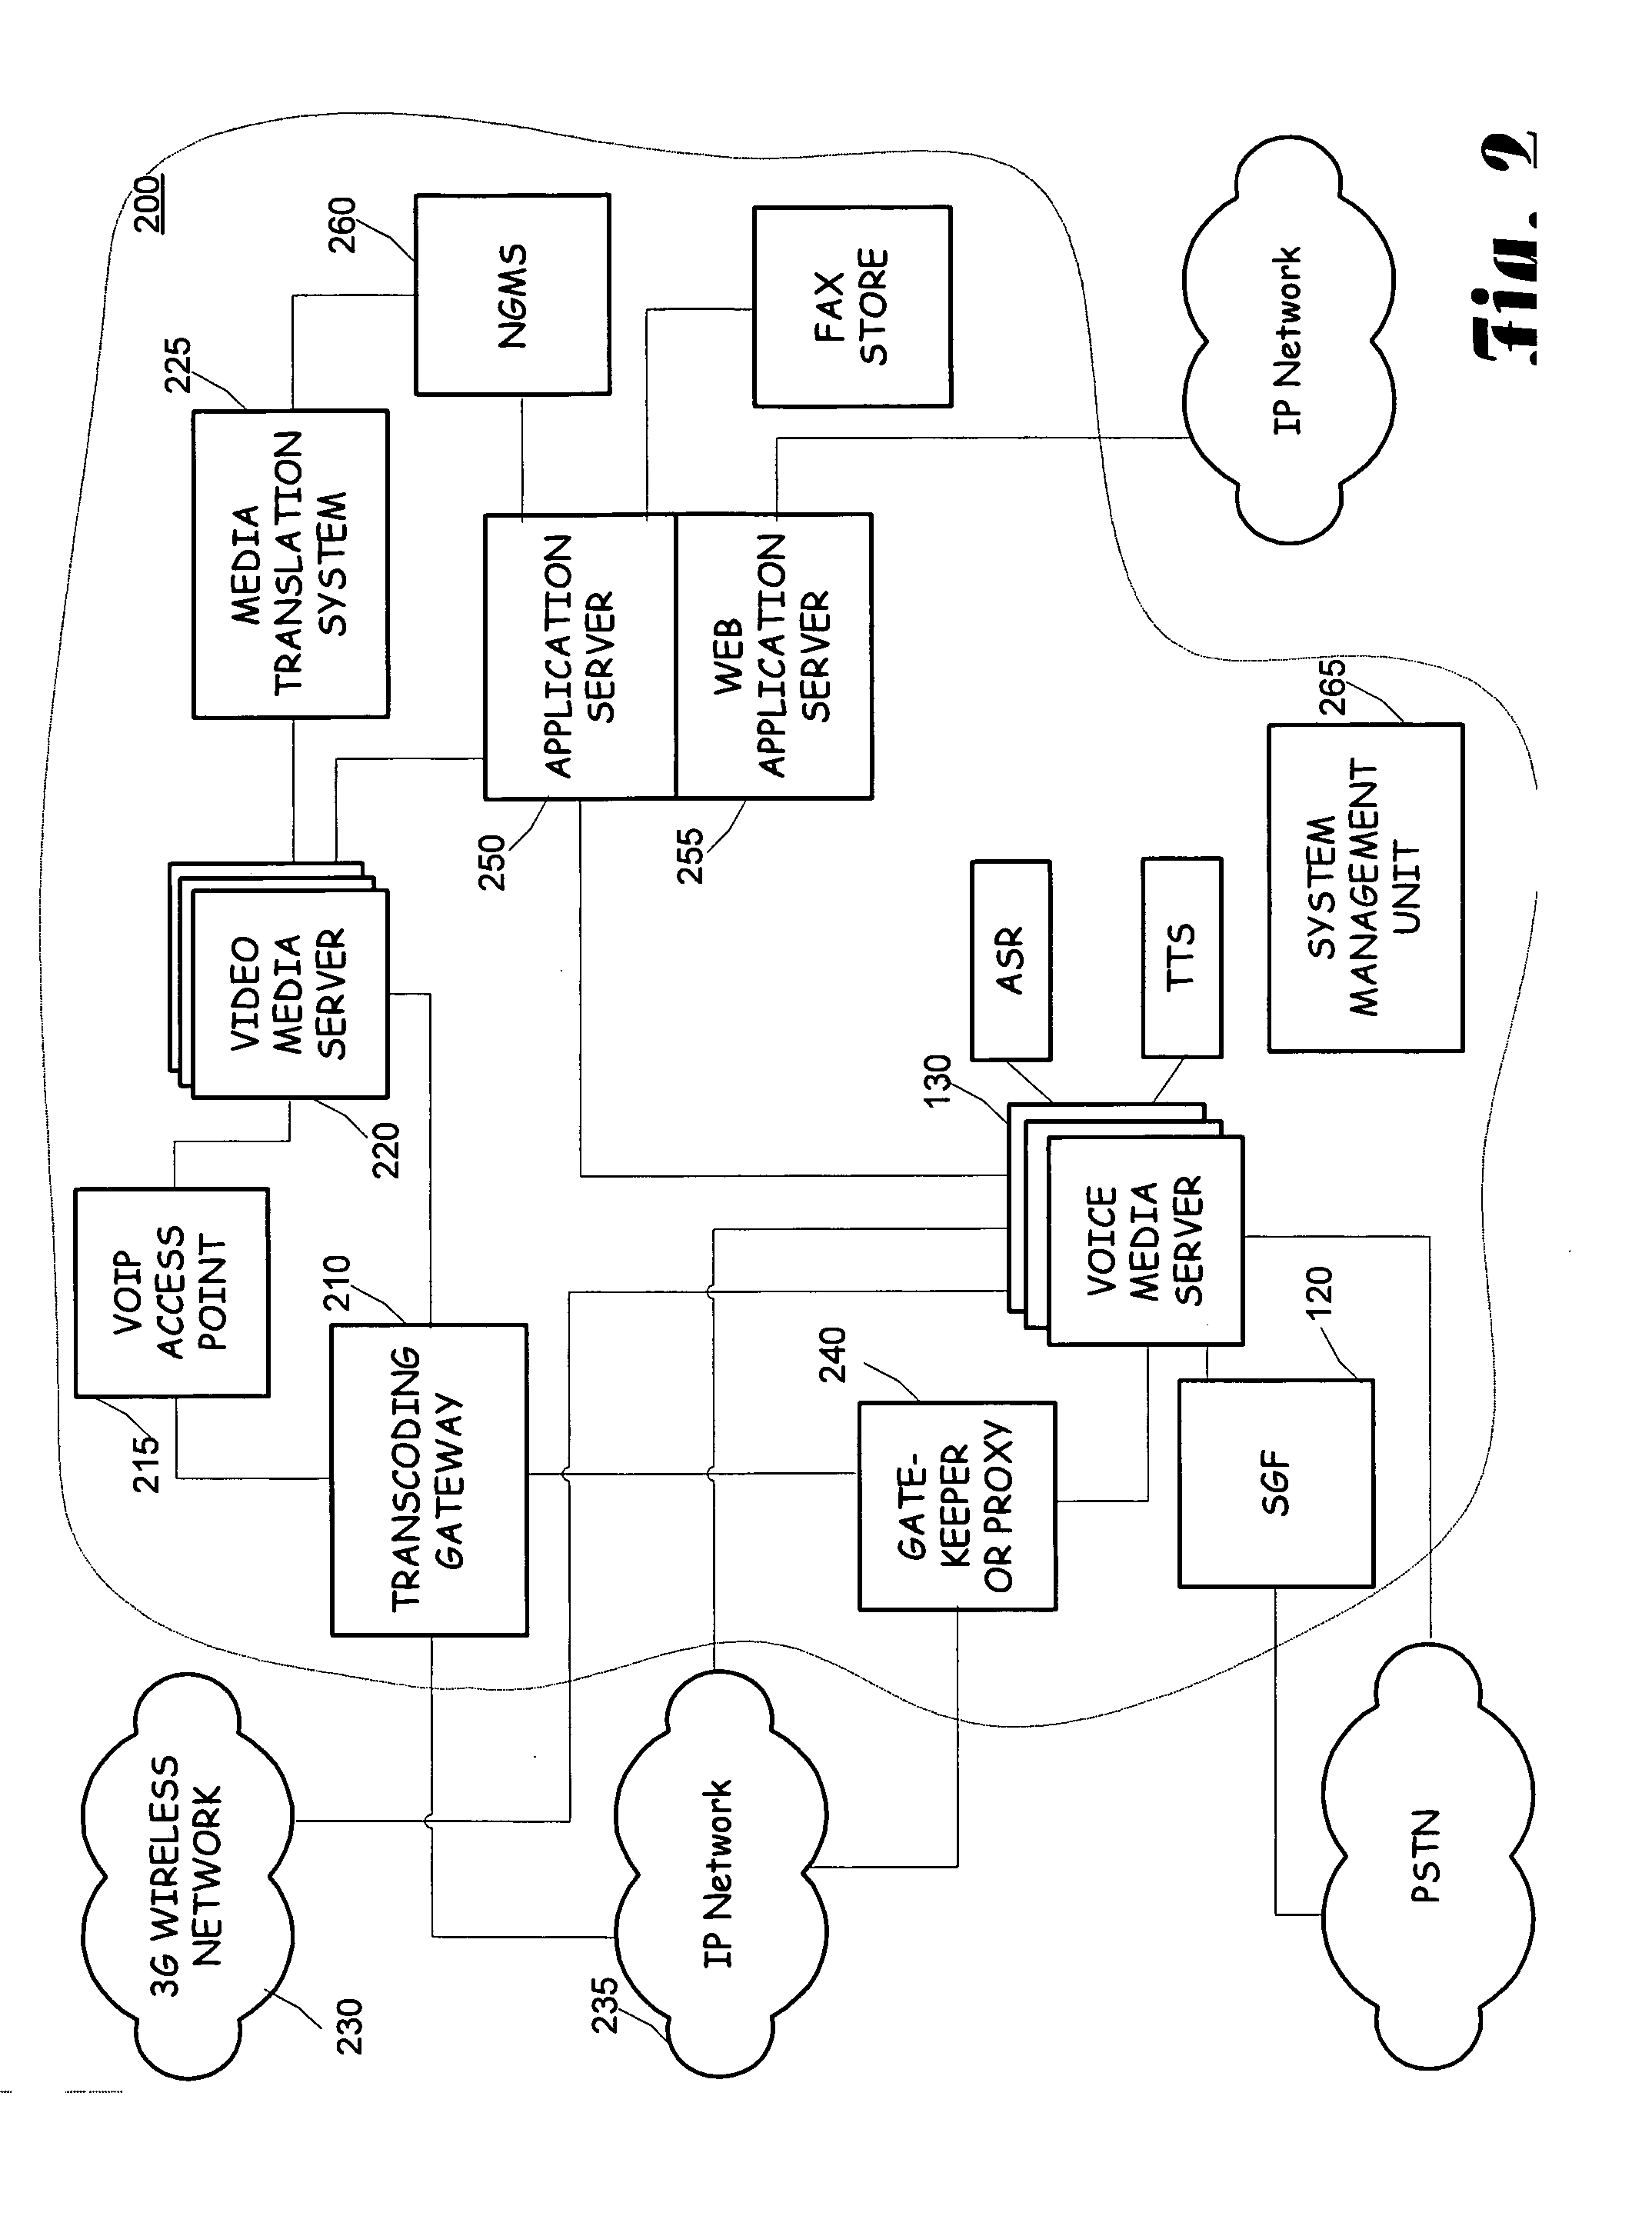 Provision of messaging services from a video messaging system based on ANI and CLID